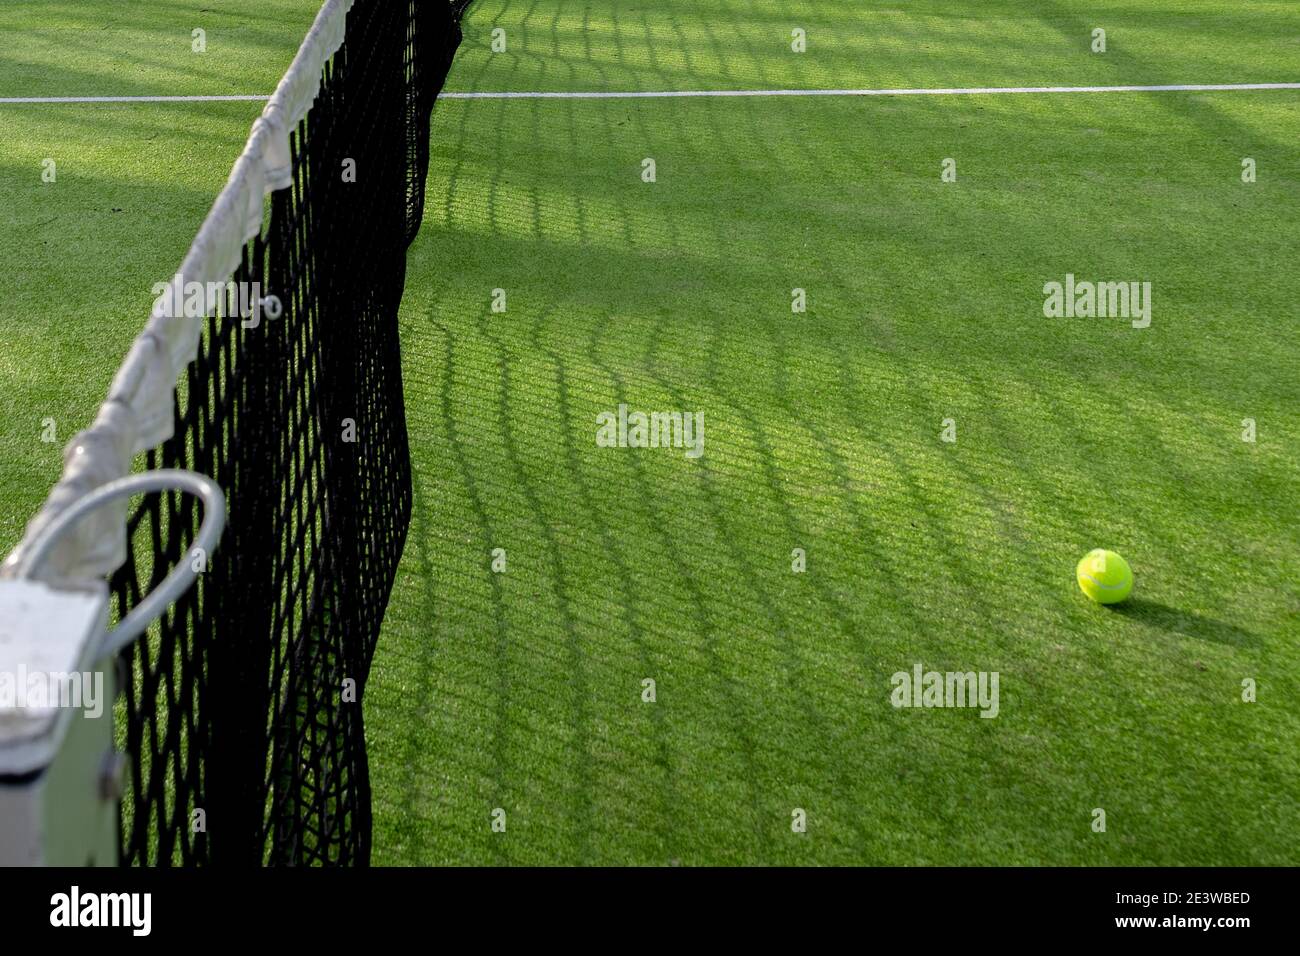 Selective focus of a black net with white protection to play paddle or tennis and a ball from the same game on green artificial grass with copy space Stock Photo